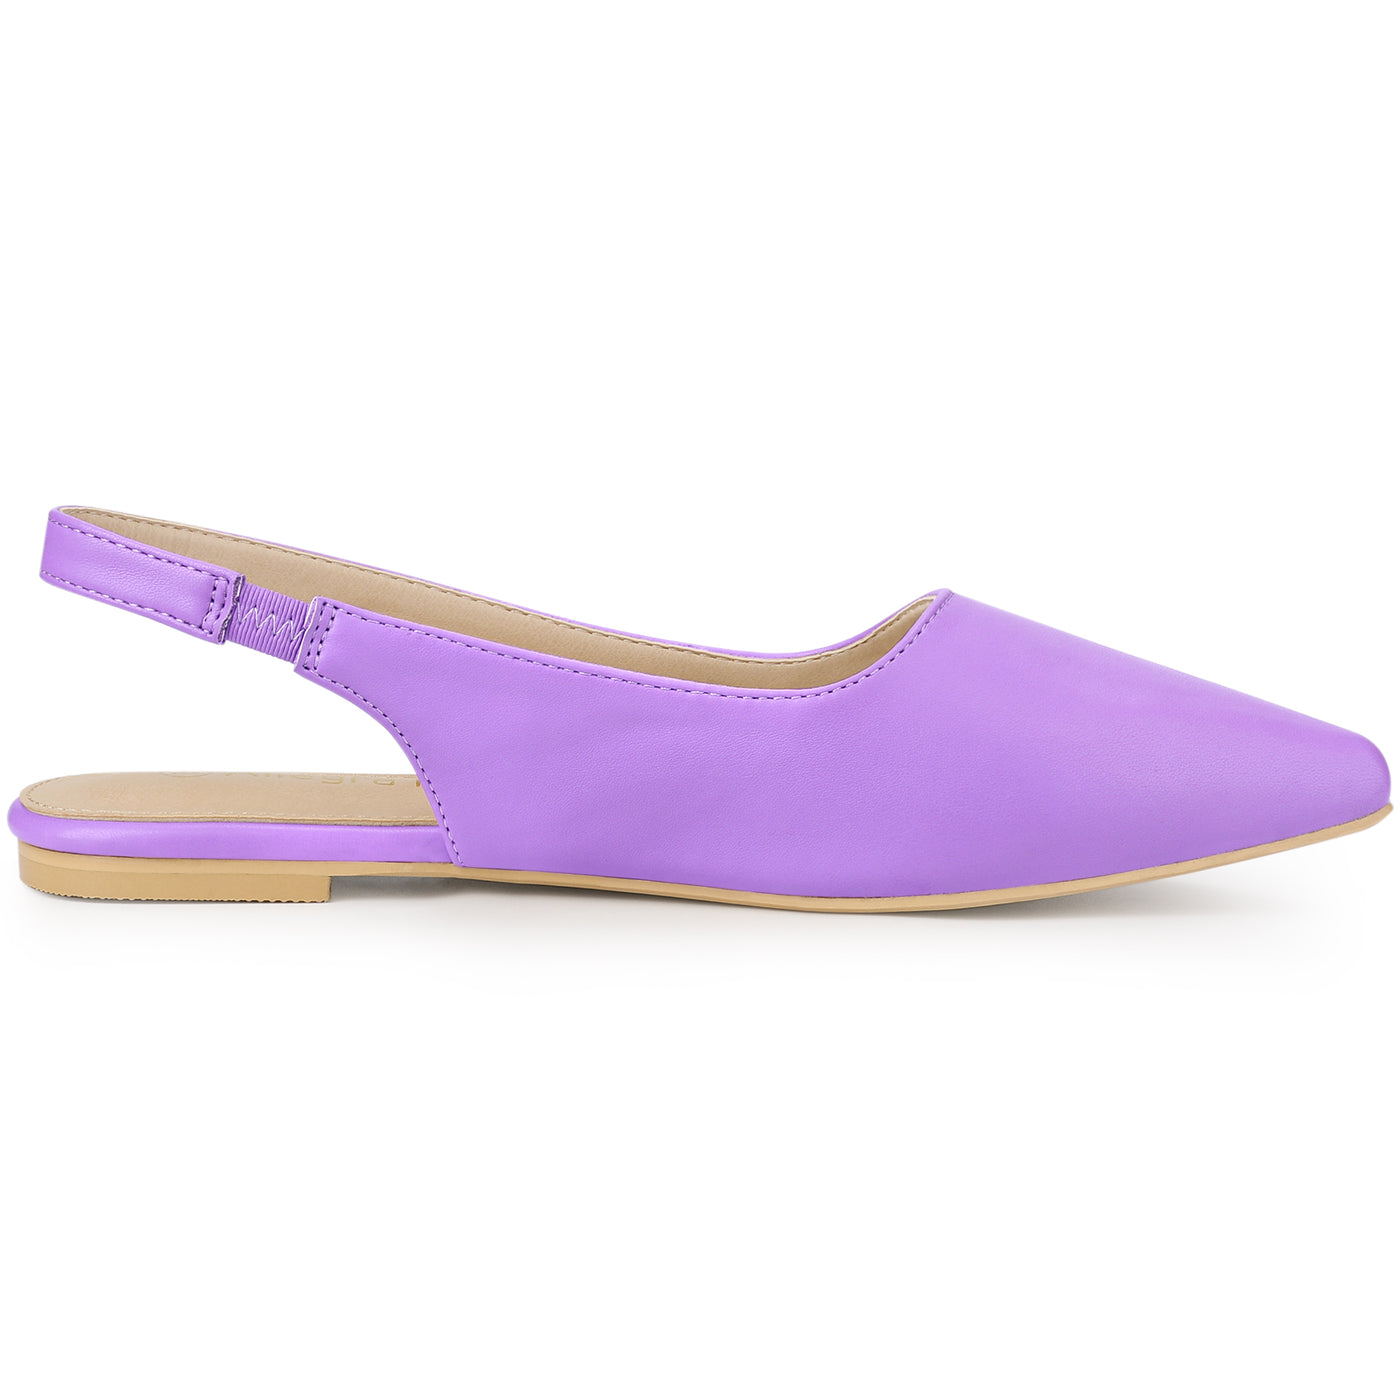 Allegra K Faux Leather Pointed Toe Slingback Slip On Flat Pumps